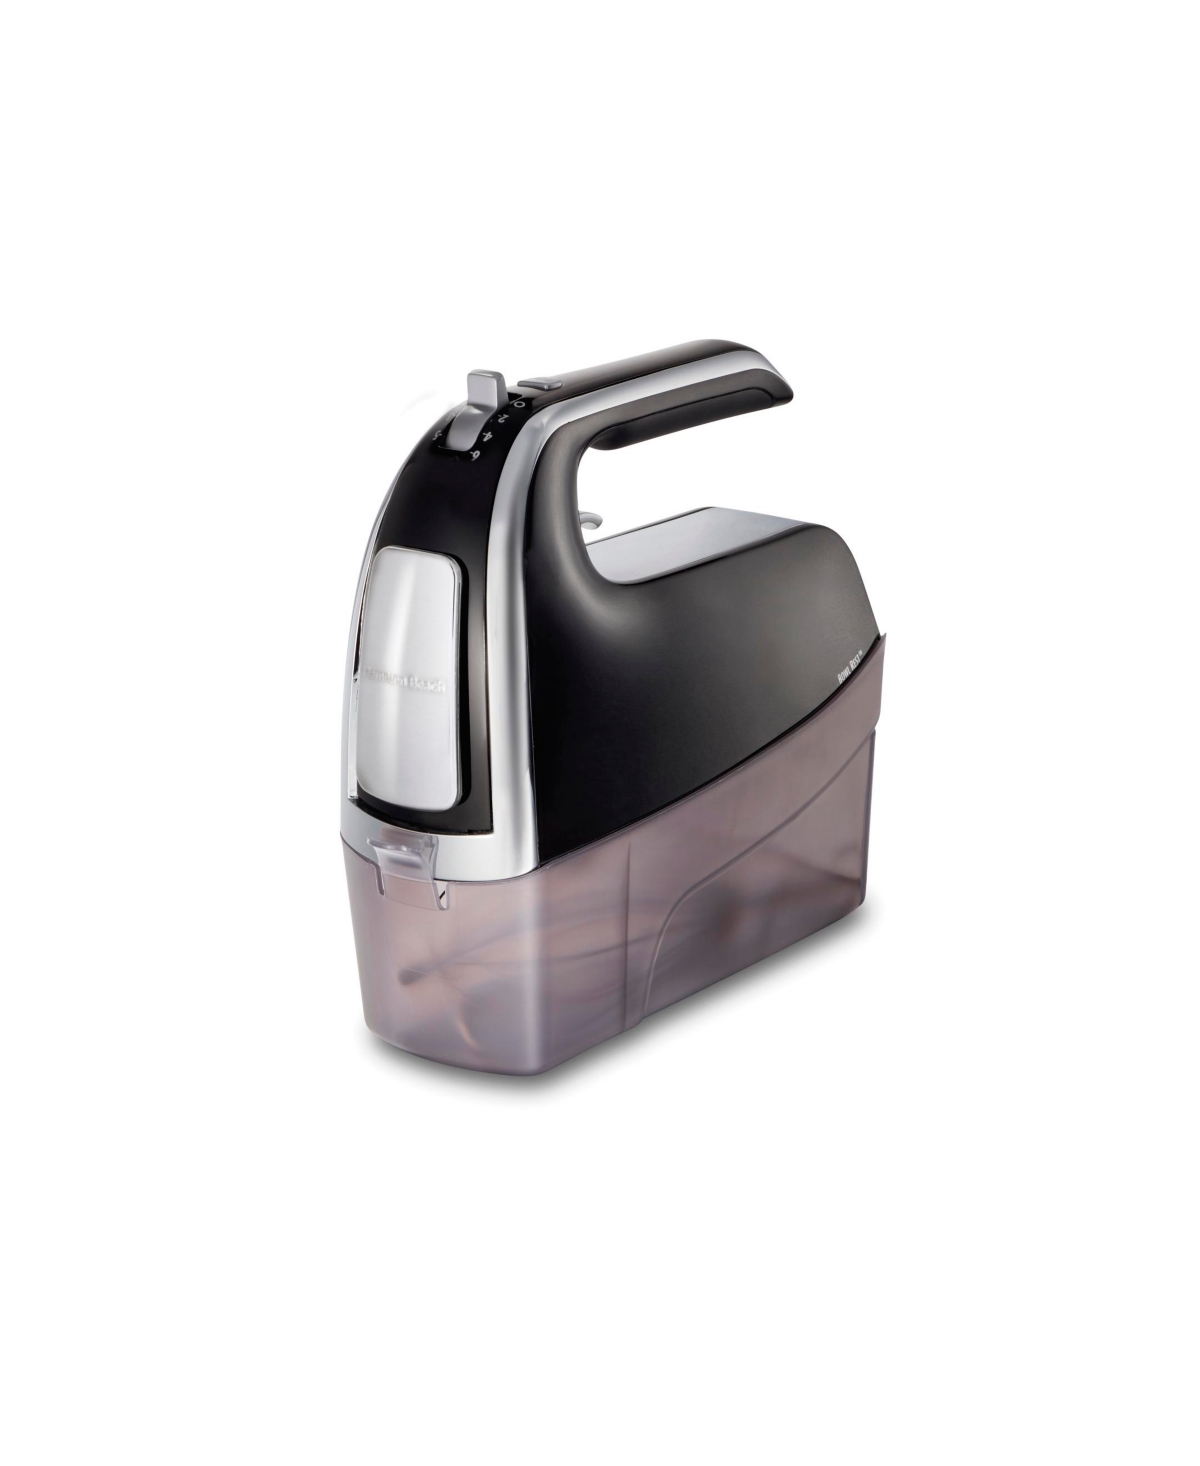 Hamilton Beach 6 Speed Performance Hand Mixer With Snap-on Case In Black